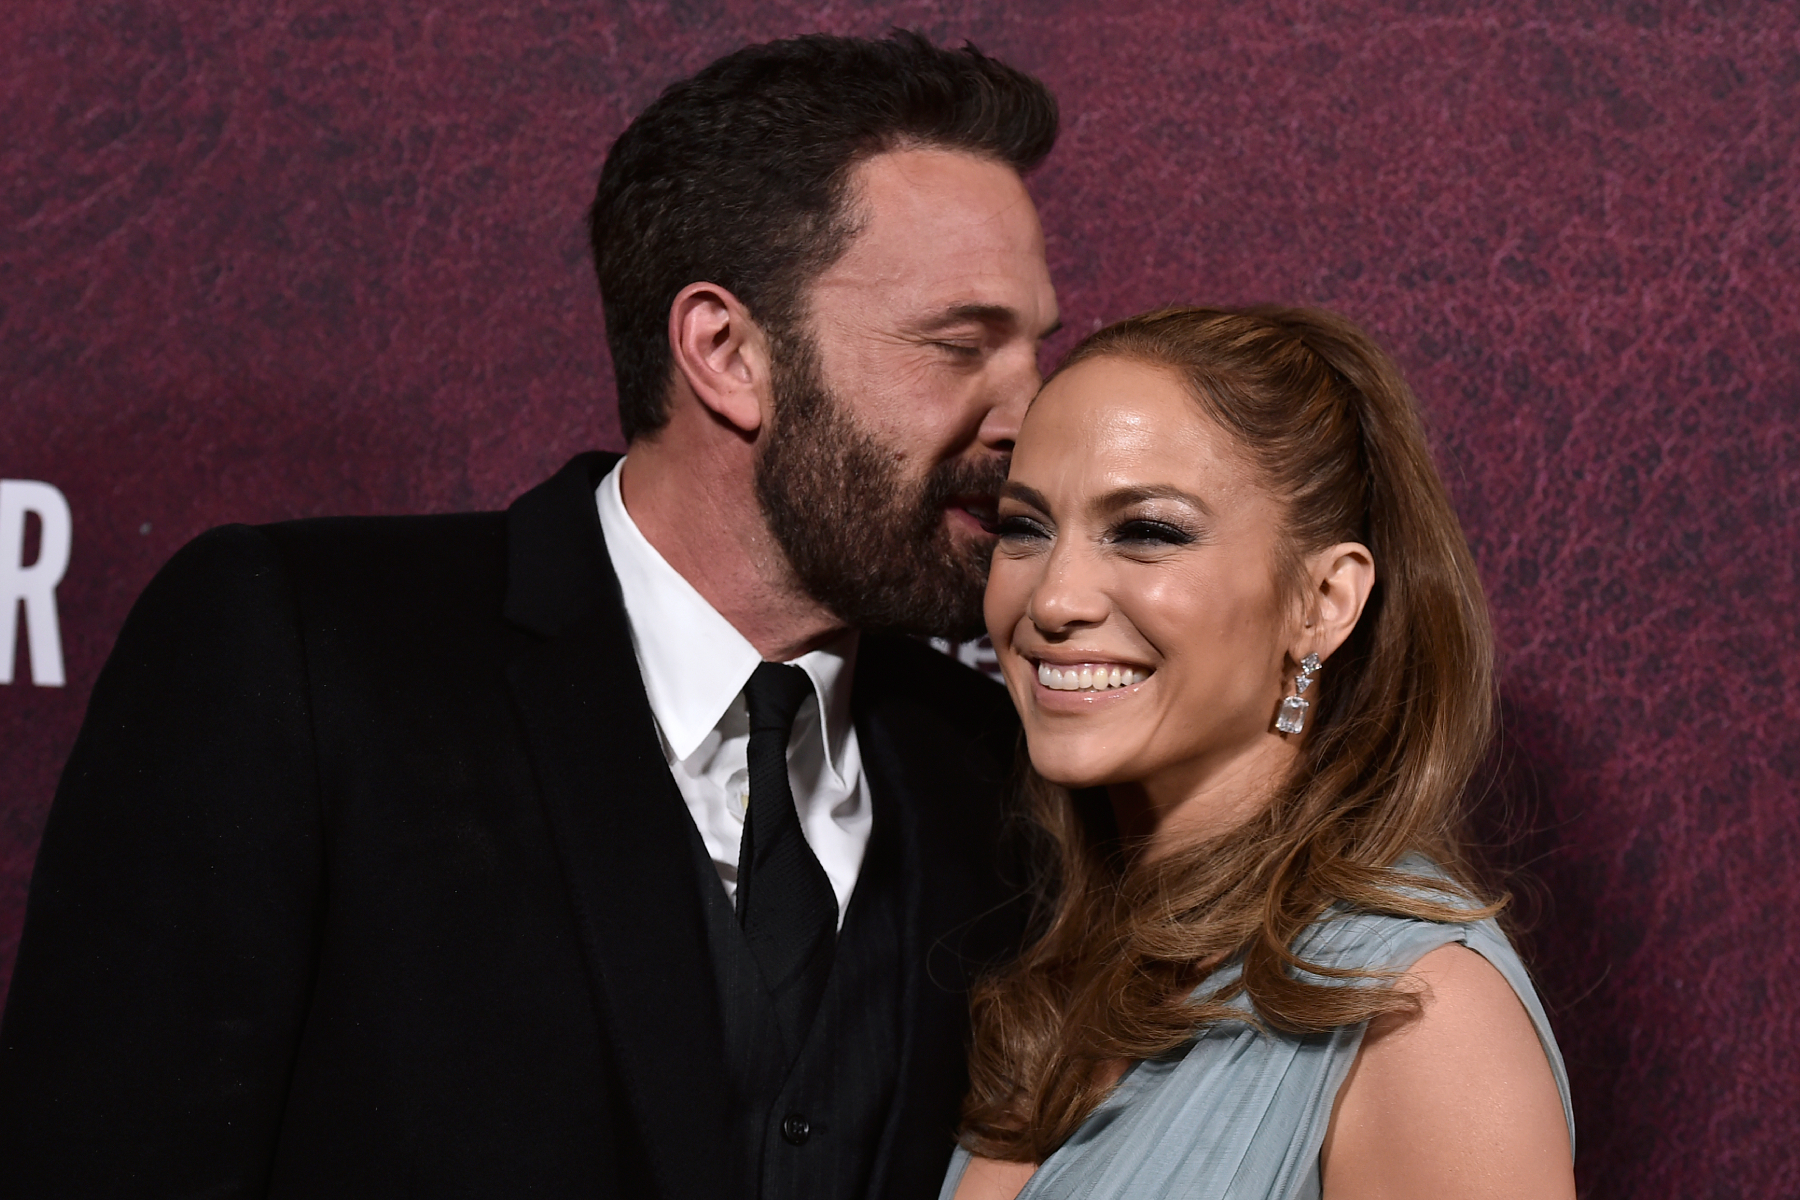 Jennifer Lopez Reveals She’s Engaged to Ben Affleck in Video Clip